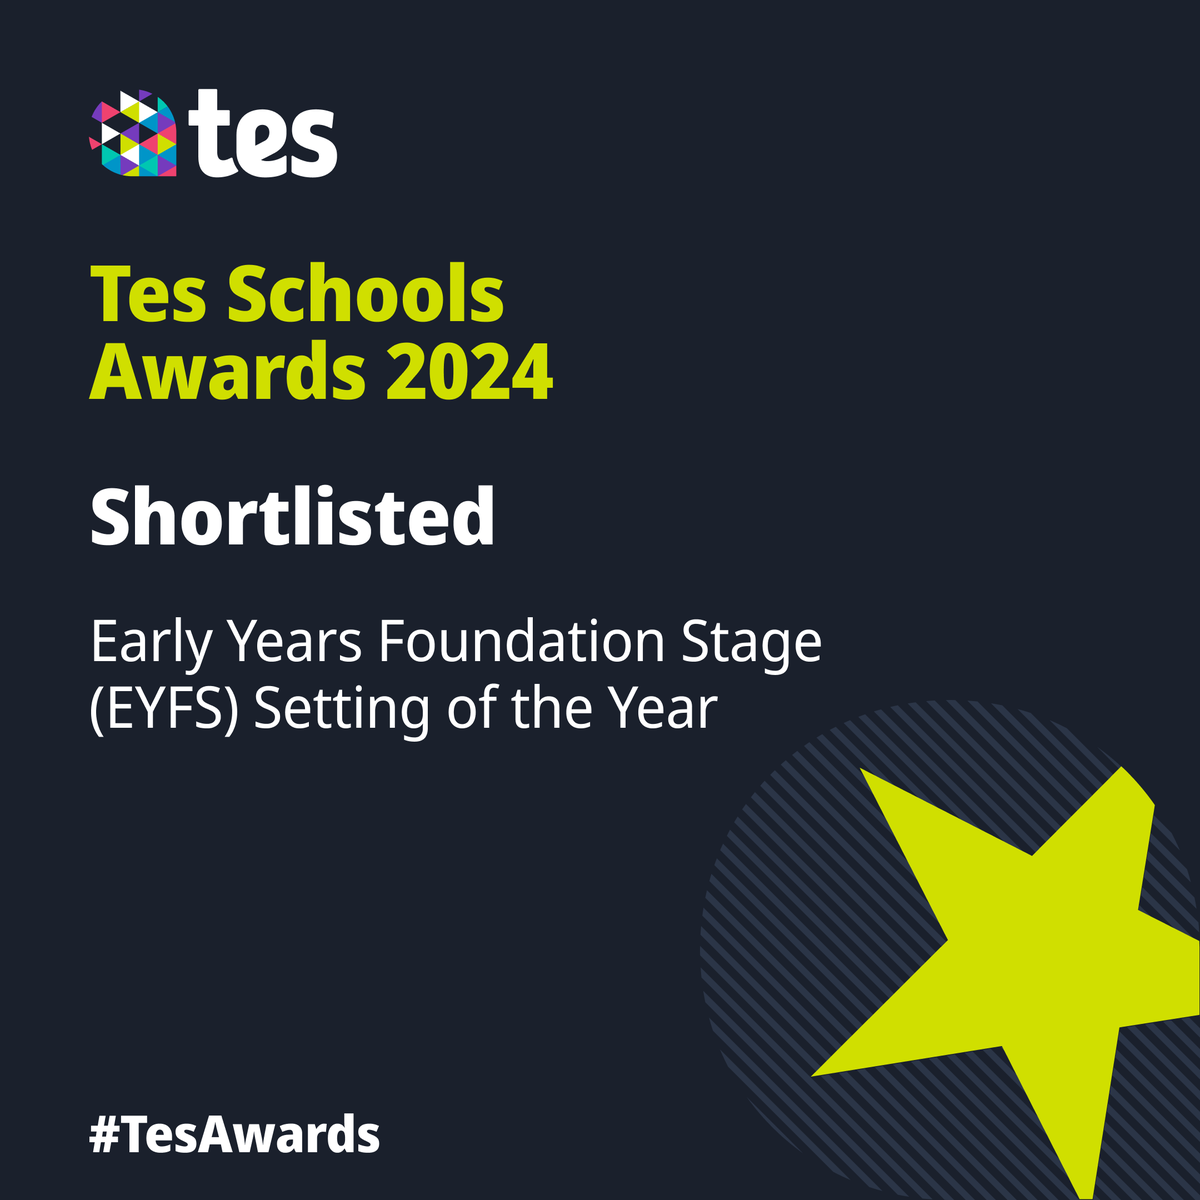 🎉 Fantastic News! 🎉 We're thrilled to share that @Carlton_MillsPS has been shortlisted for the prestigious @tes School Awards 2024 in the category of EYFS Setting of the Year! Huge congratulations to our amazing team at @Carlton_MillsPS for their dedication and commitment to…